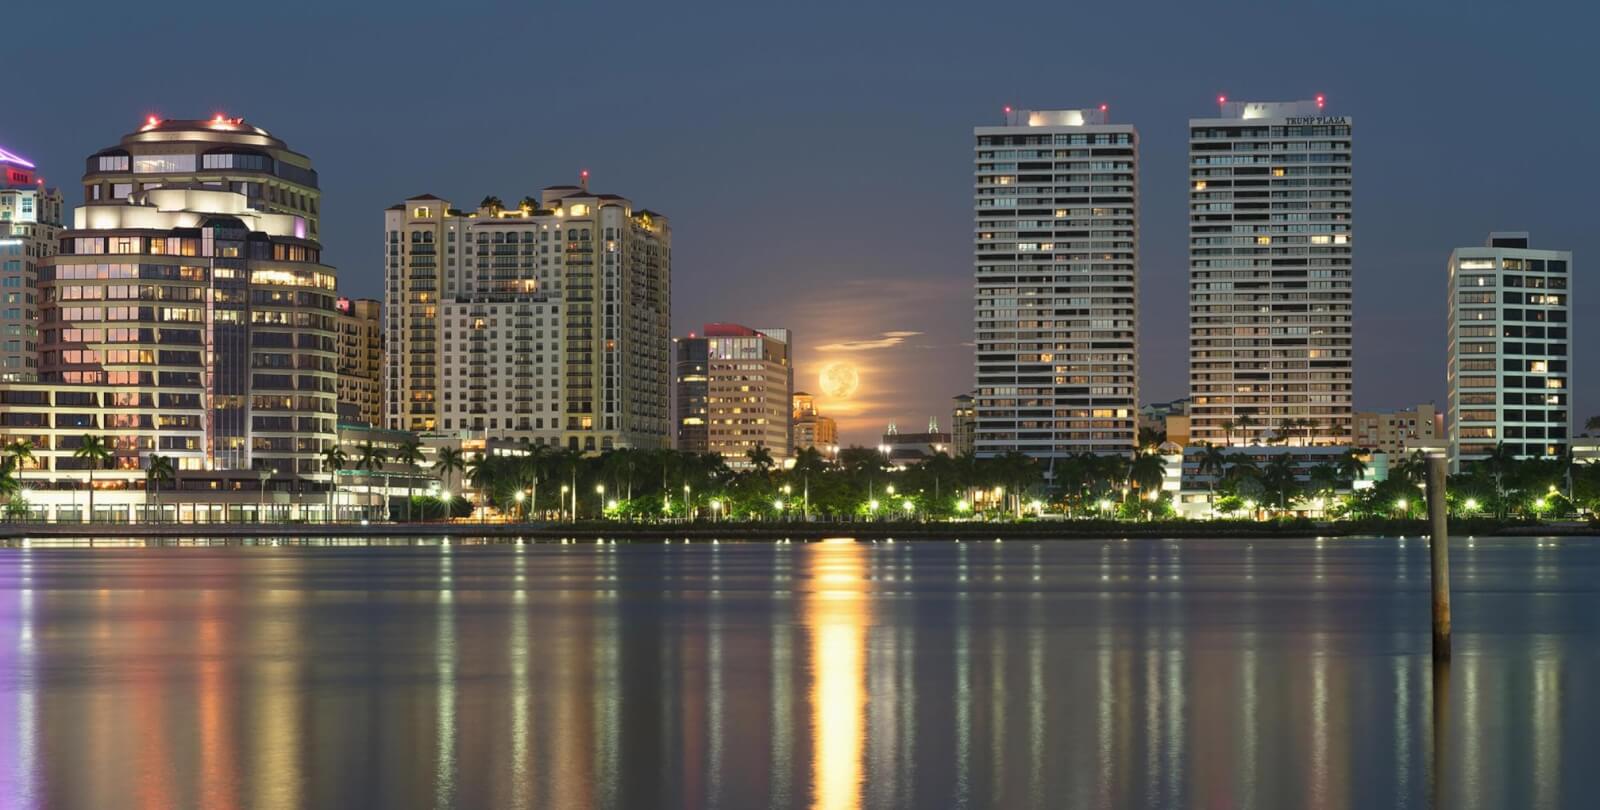 Attractions & Things to do in WPB